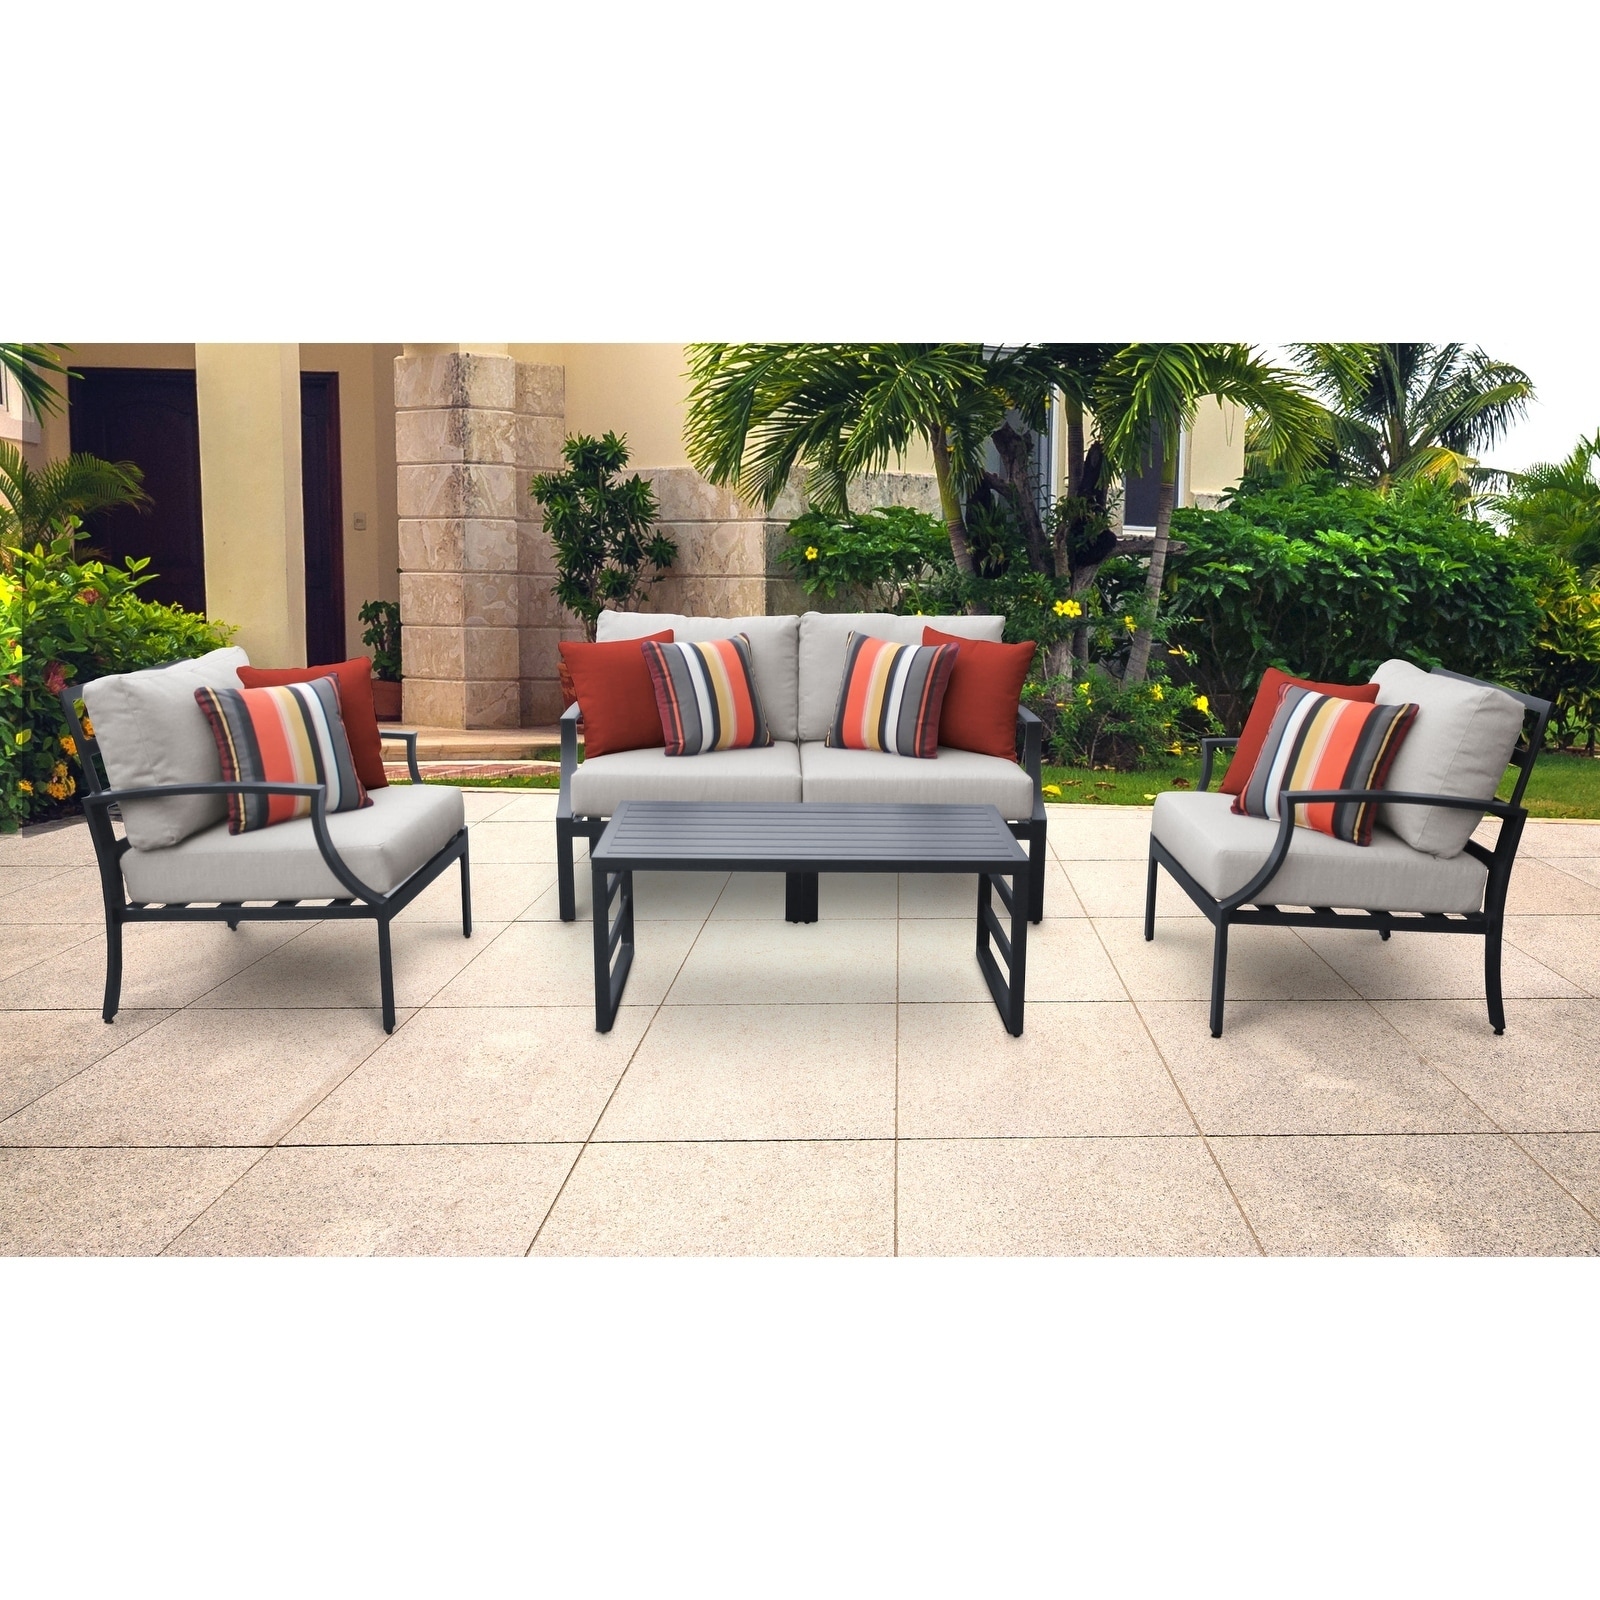 Moresby 5-piece Outdoor Aluminum Patio Furniture Set 05c By Havenside Home